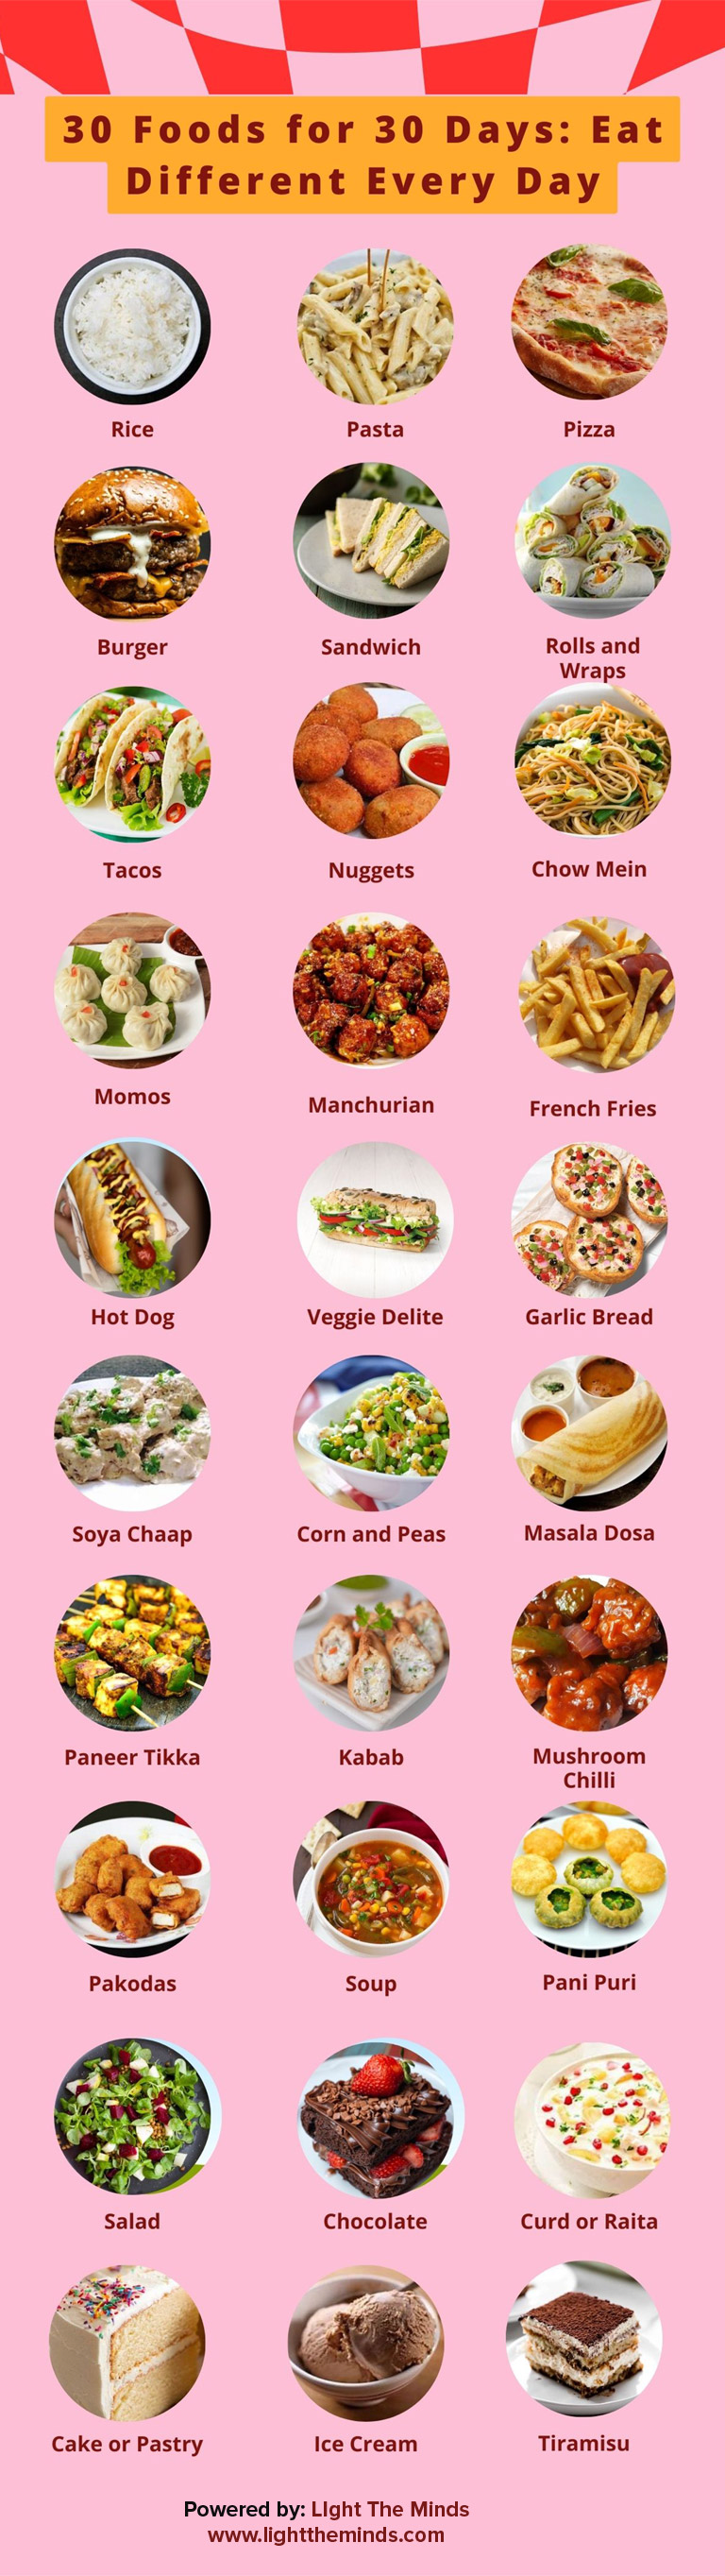 Eat 30 Foods in 30 Days Infographic